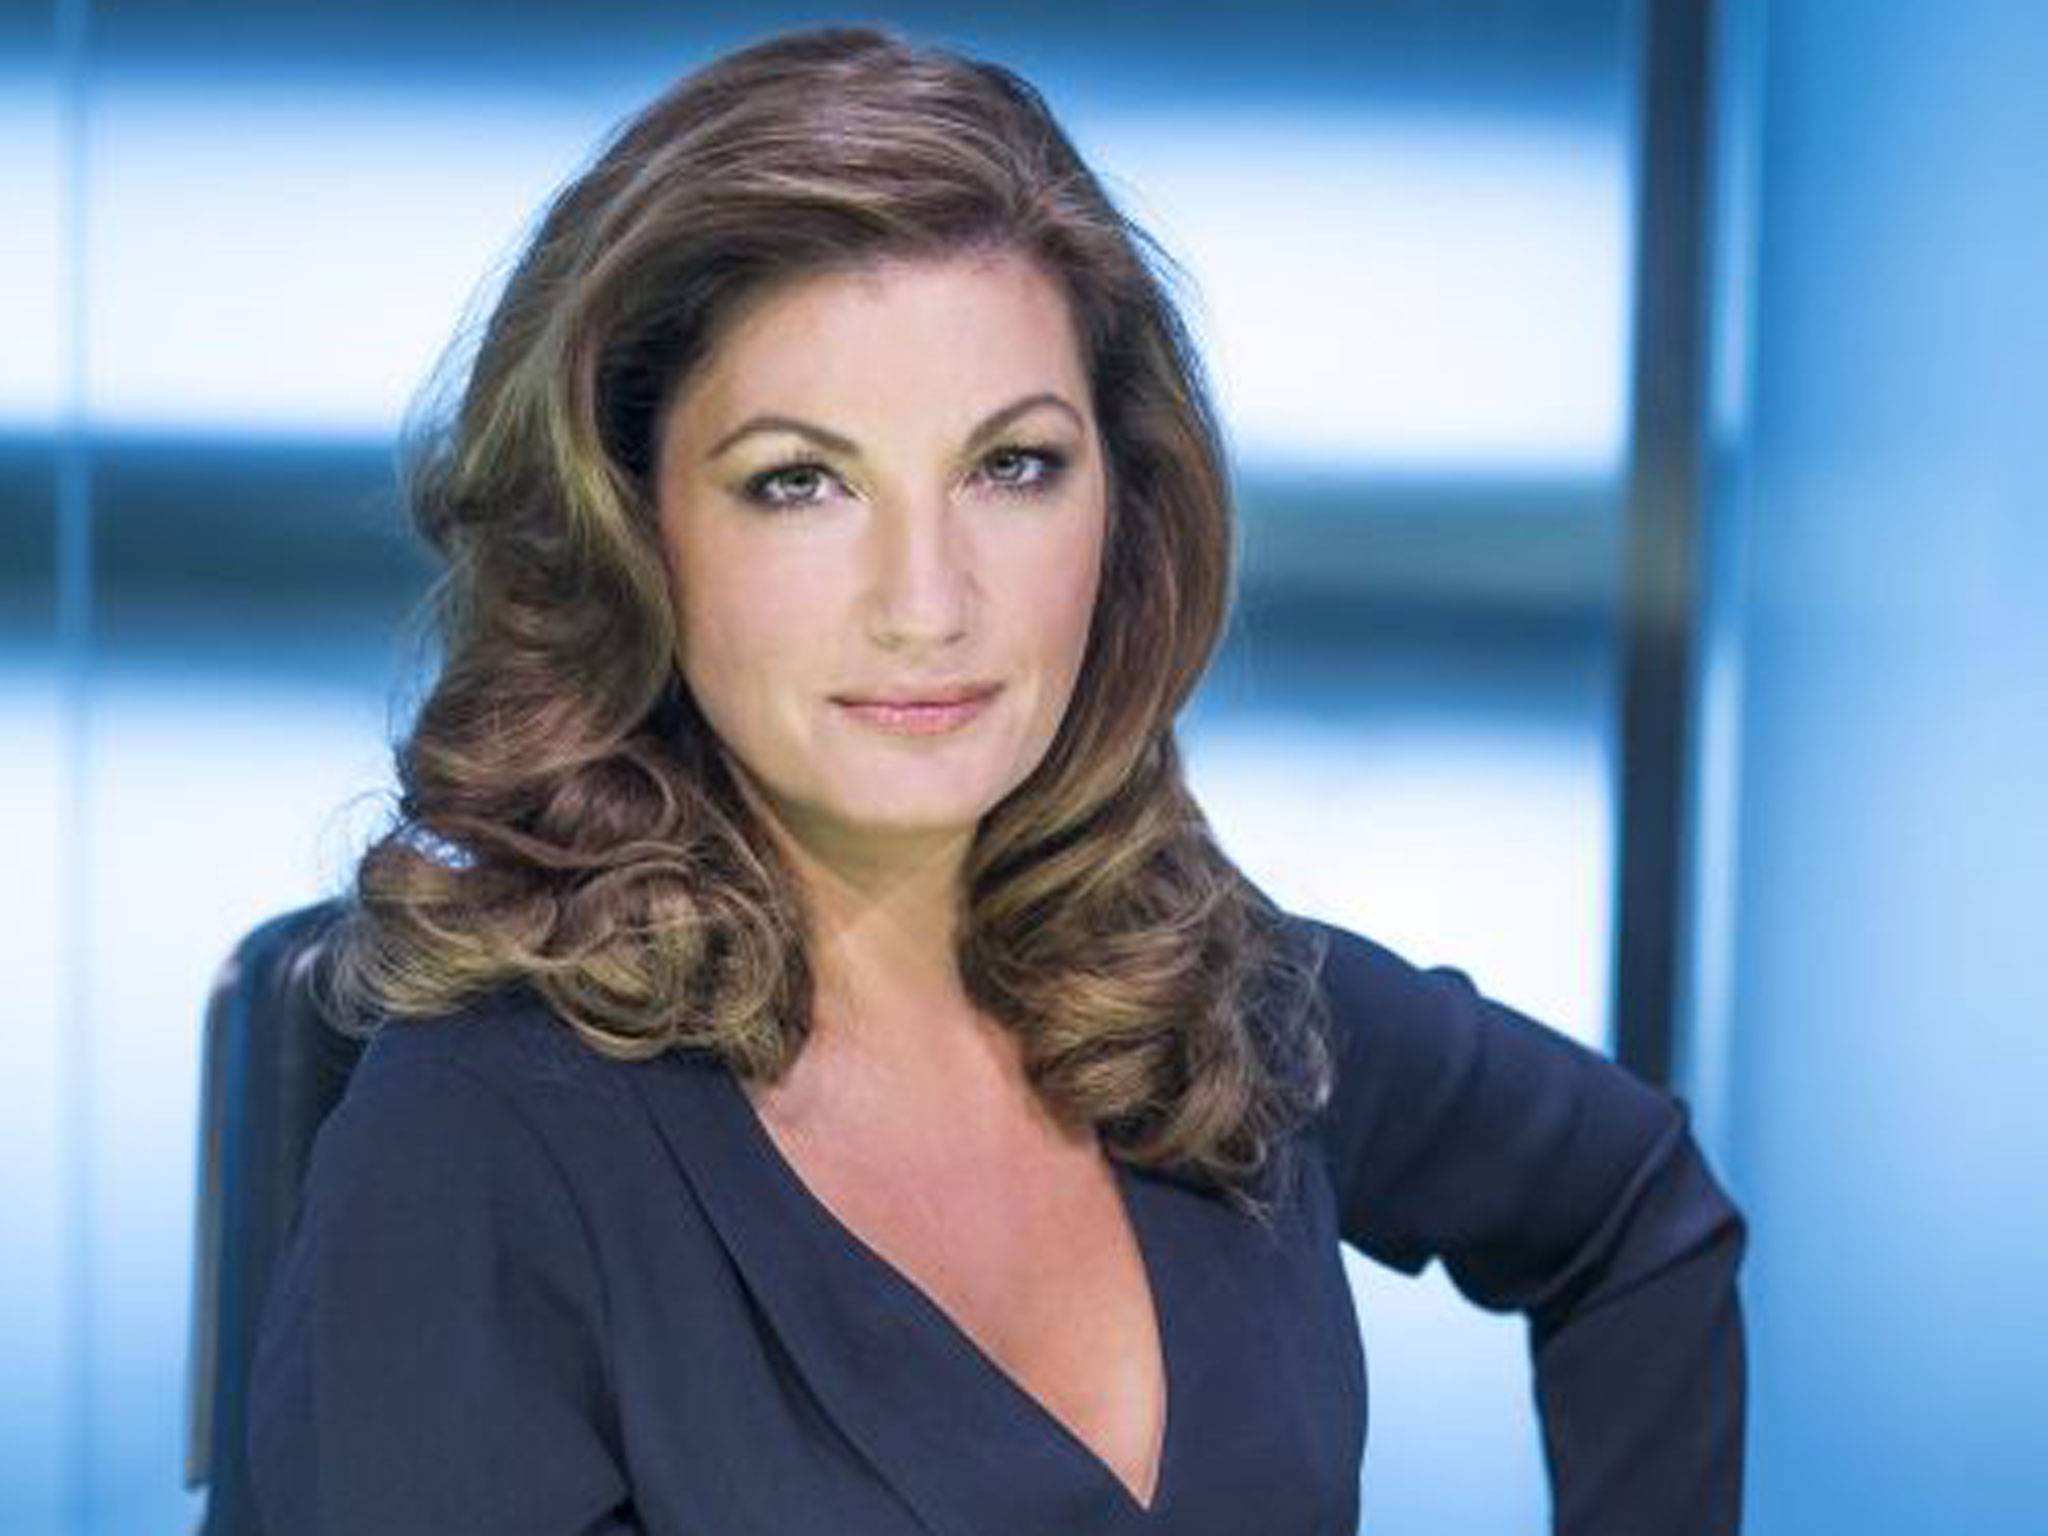 West Ham United vice-chairman and The Apprentice star Karren Brady was among those who had their personal data targeted by consultants working for Tottenham Hotspur